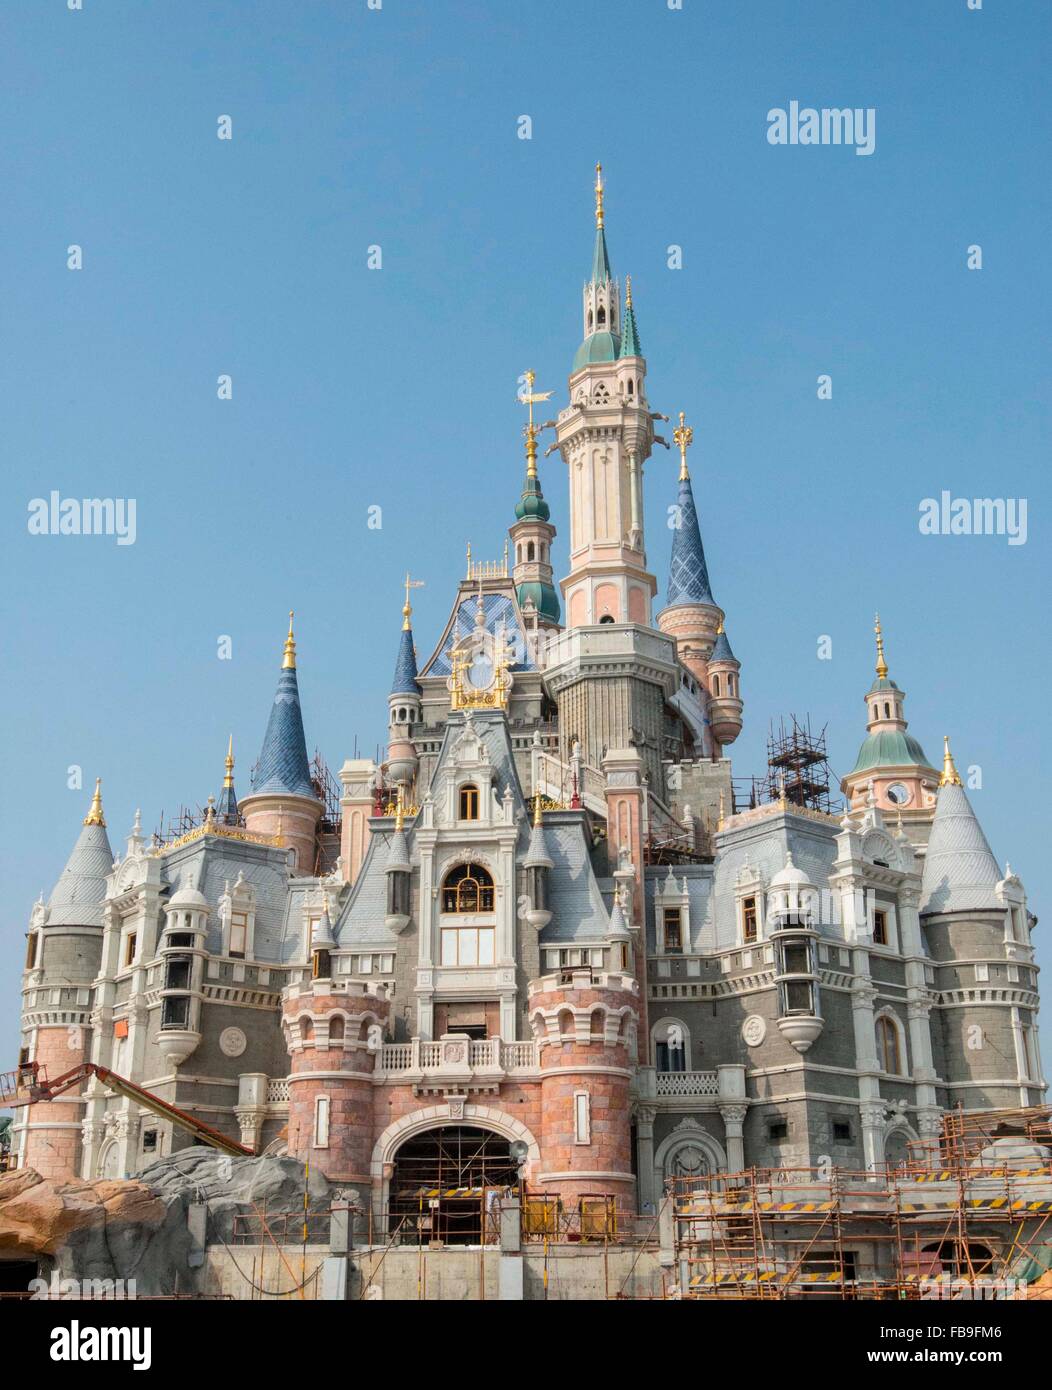 Shanghai. 13th Jan, 2016. Photo taken on Nov. 14, 2015 shows the castle of Shanghai Disney Resort under construction in east China's Shanghai. Shanghai Disney Resort will officially open and welcome its first guests on June 16, the Walt Disney Company and Shanghai Shendi Group announced Wednesday. Construction of the resort, the sixth of its kind worldwide, started in 2011 with an investment of 34 billion yuan (about 5.5 billion U.S. dollars). © Xinhua/Alamy Live News Stock Photo